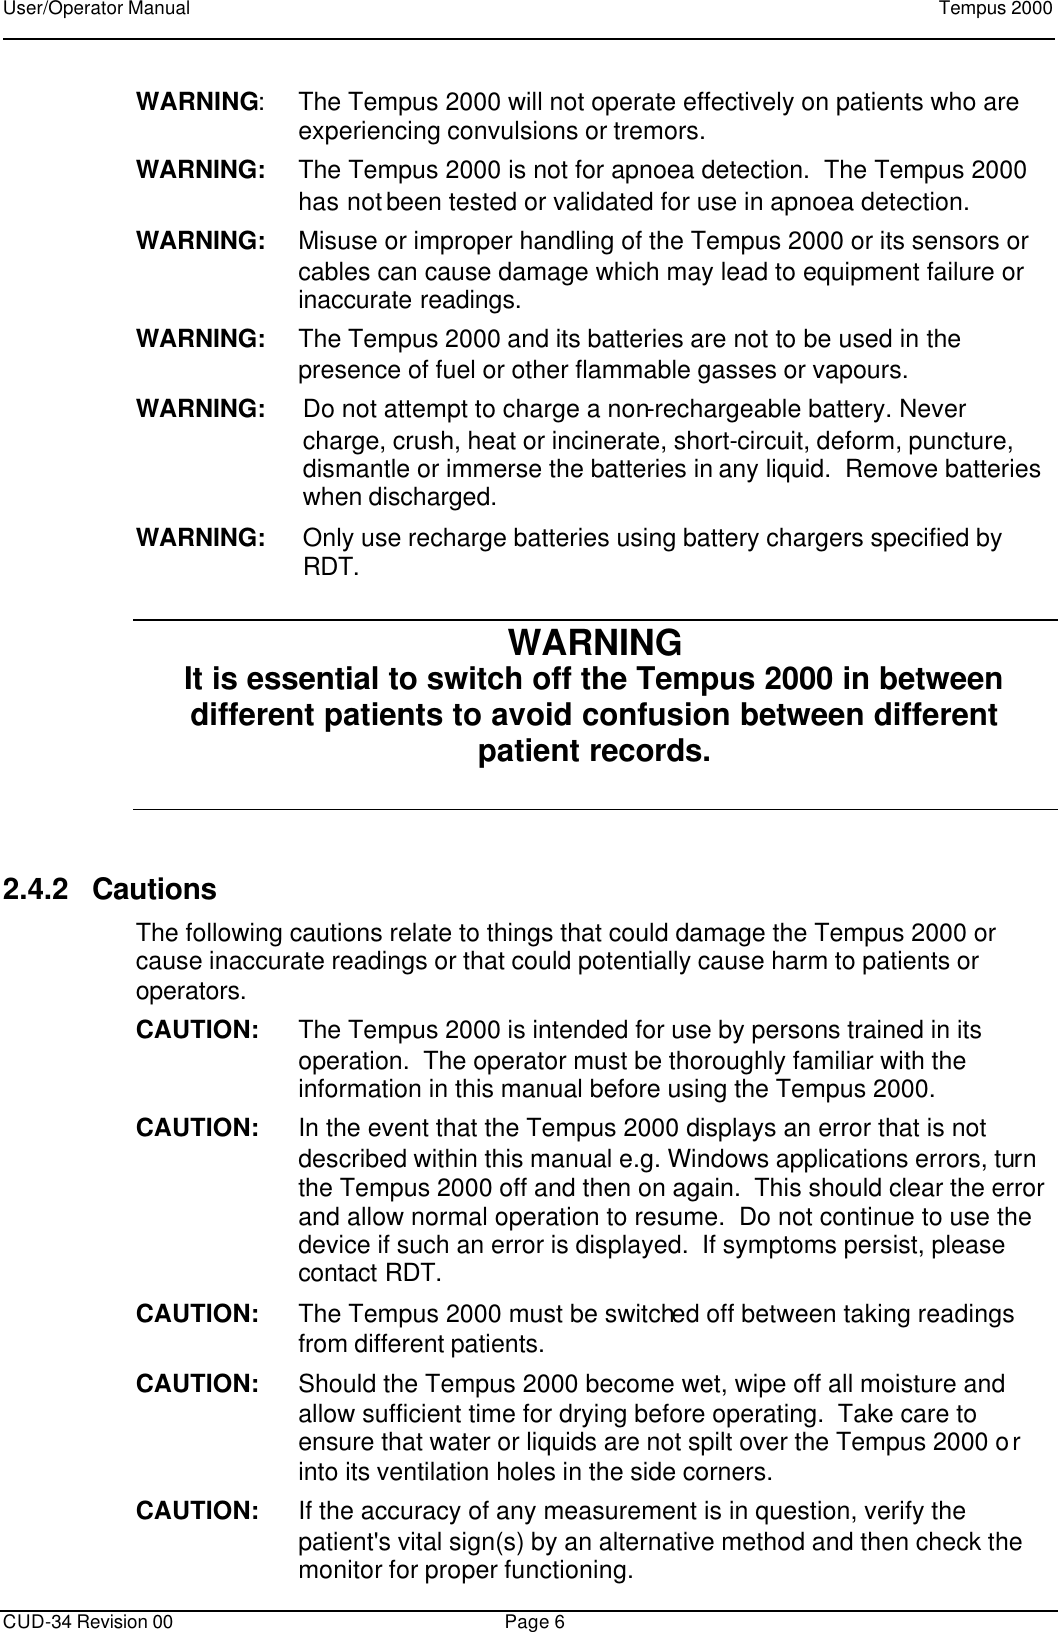 User/Operator Manual    Tempus 2000      CUD-34 Revision 00 Page 6  WARNING: The Tempus 2000 will not operate effectively on patients who are experiencing convulsions or tremors. WARNING: The Tempus 2000 is not for apnoea detection.  The Tempus 2000 has not been tested or validated for use in apnoea detection. WARNING: Misuse or improper handling of the Tempus 2000 or its sensors or cables can cause damage which may lead to equipment failure or inaccurate readings. WARNING: The Tempus 2000 and its batteries are not to be used in the presence of fuel or other flammable gasses or vapours.  WARNING: Do not attempt to charge a non-rechargeable battery. Never charge, crush, heat or incinerate, short-circuit, deform, puncture, dismantle or immerse the batteries in any liquid.  Remove batteries when discharged. WARNING: Only use recharge batteries using battery chargers specified by RDT. WARNING  It is essential to switch off the Tempus 2000 in between different patients to avoid confusion between different patient records.  2.4.2 Cautions The following cautions relate to things that could damage the Tempus 2000 or cause inaccurate readings or that could potentially cause harm to patients or operators. CAUTION: The Tempus 2000 is intended for use by persons trained in its operation.  The operator must be thoroughly familiar with the information in this manual before using the Tempus 2000. CAUTION: In the event that the Tempus 2000 displays an error that is not described within this manual e.g. Windows applications errors, turn the Tempus 2000 off and then on again.  This should clear the error and allow normal operation to resume.  Do not continue to use the device if such an error is displayed.  If symptoms persist, please contact RDT. CAUTION: The Tempus 2000 must be switched off between taking readings from different patients. CAUTION: Should the Tempus 2000 become wet, wipe off all moisture and allow sufficient time for drying before operating.  Take care to ensure that water or liquids are not spilt over the Tempus 2000 or into its ventilation holes in the side corners. CAUTION: If the accuracy of any measurement is in question, verify the patient&apos;s vital sign(s) by an alternative method and then check the monitor for proper functioning. 